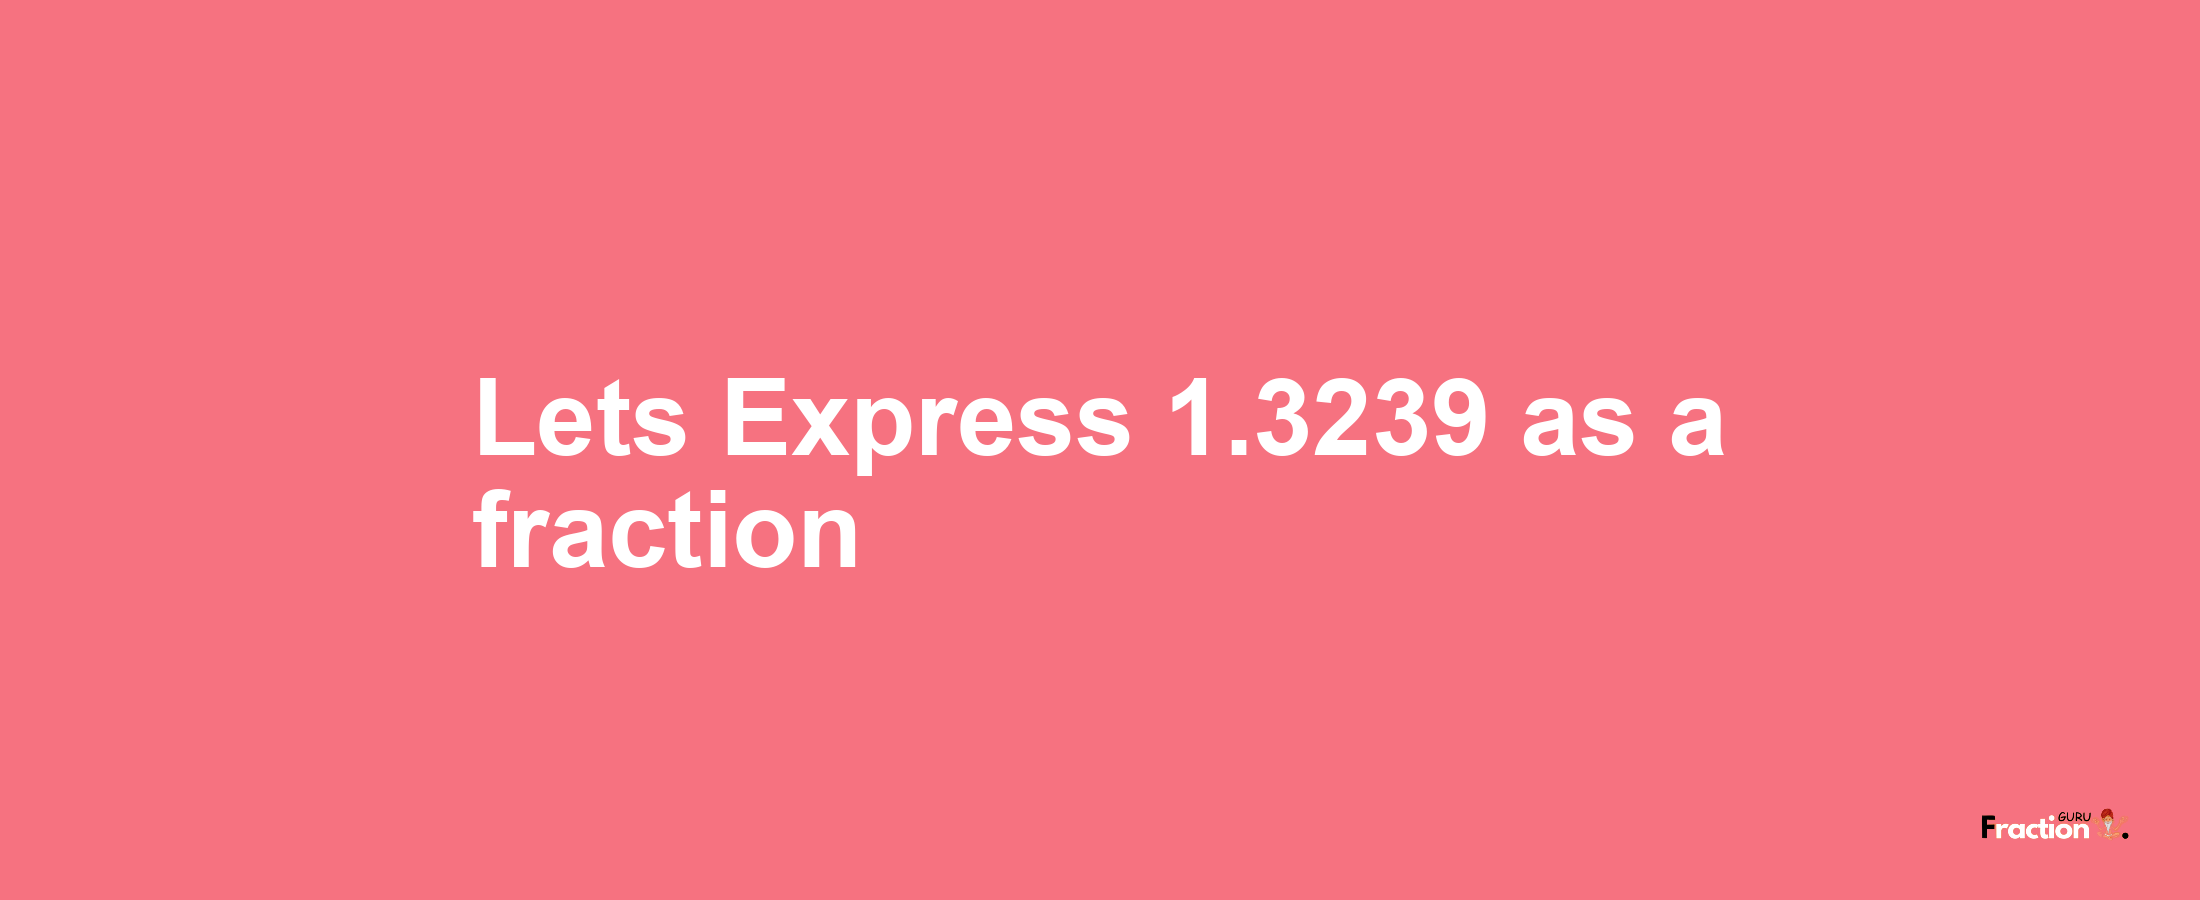 Lets Express 1.3239 as afraction